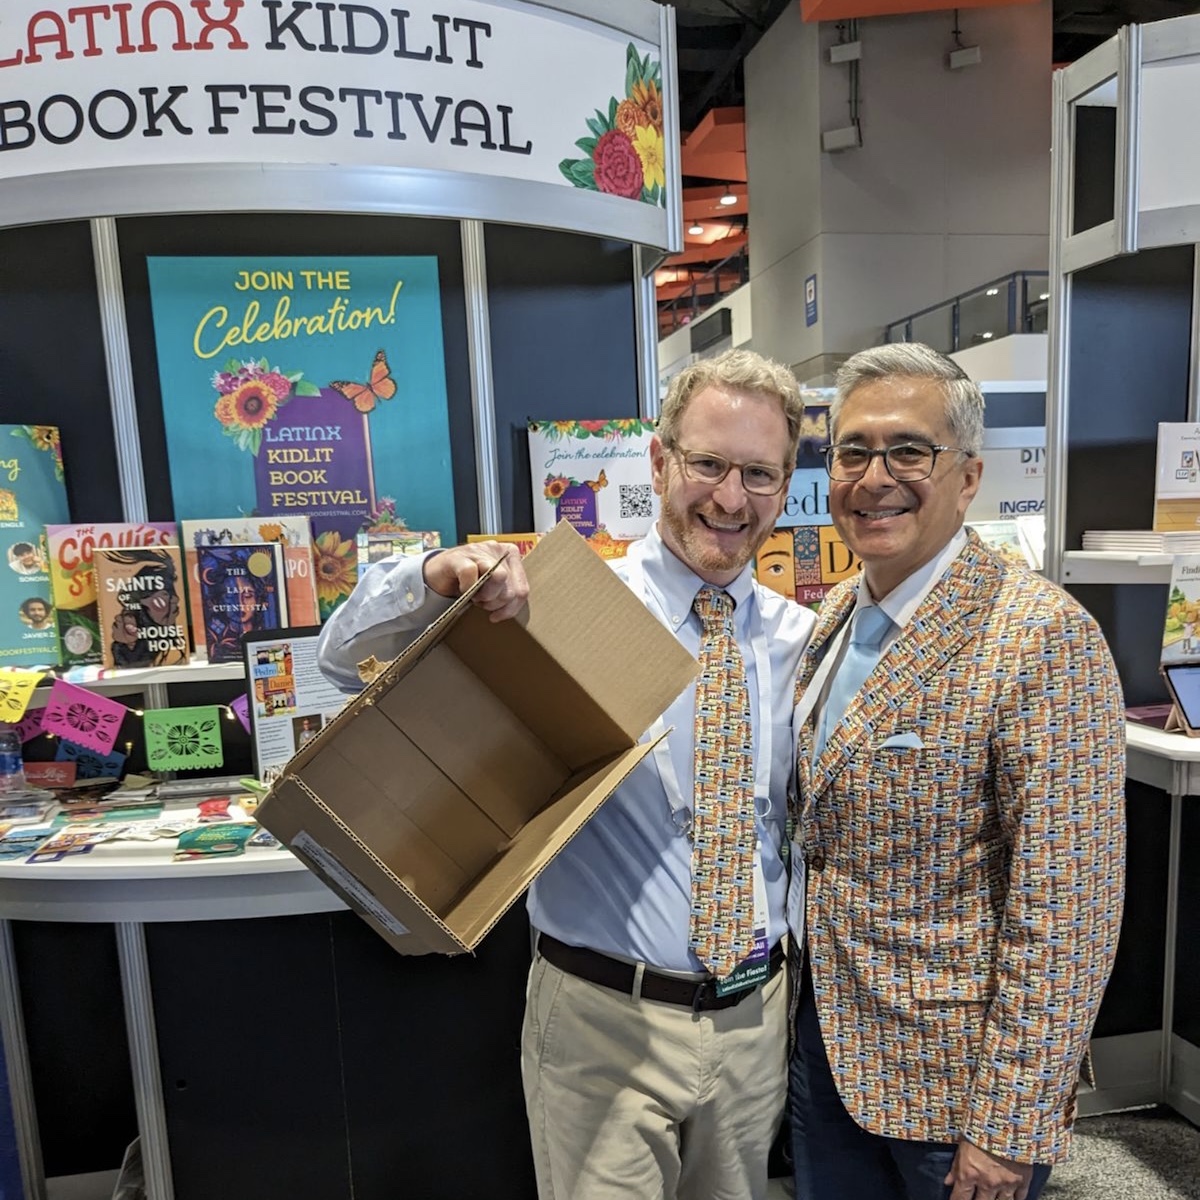 Special thanks to my husband Jim, @MGarciaWrites @IsmeeWilliams and Megan for hosting me, and helping me give away 10 boxes full of books to appreciative #Librarians at the @LatinxKidLitBF booth!

#PedroAndDaniel #ALAAC23 #ALAAC2023 #LibrarianTwitter #BookTwitter